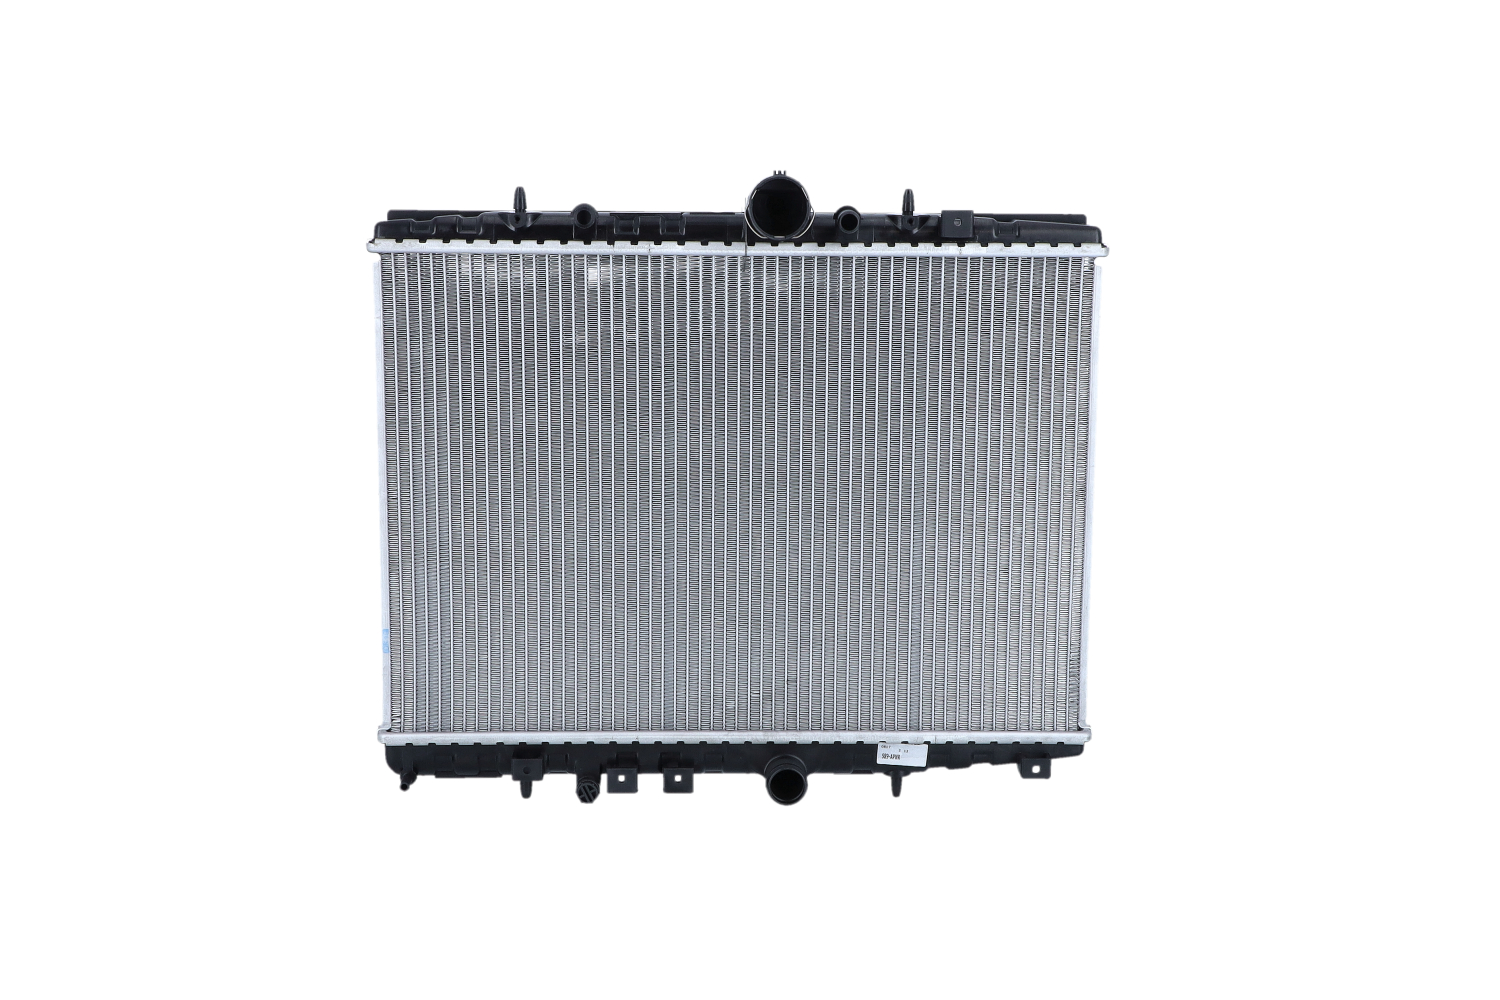 NRF 58719 Engine radiator Aluminium, 532 x 377 x 30 mm, with mounting parts, Brazed cooling fins